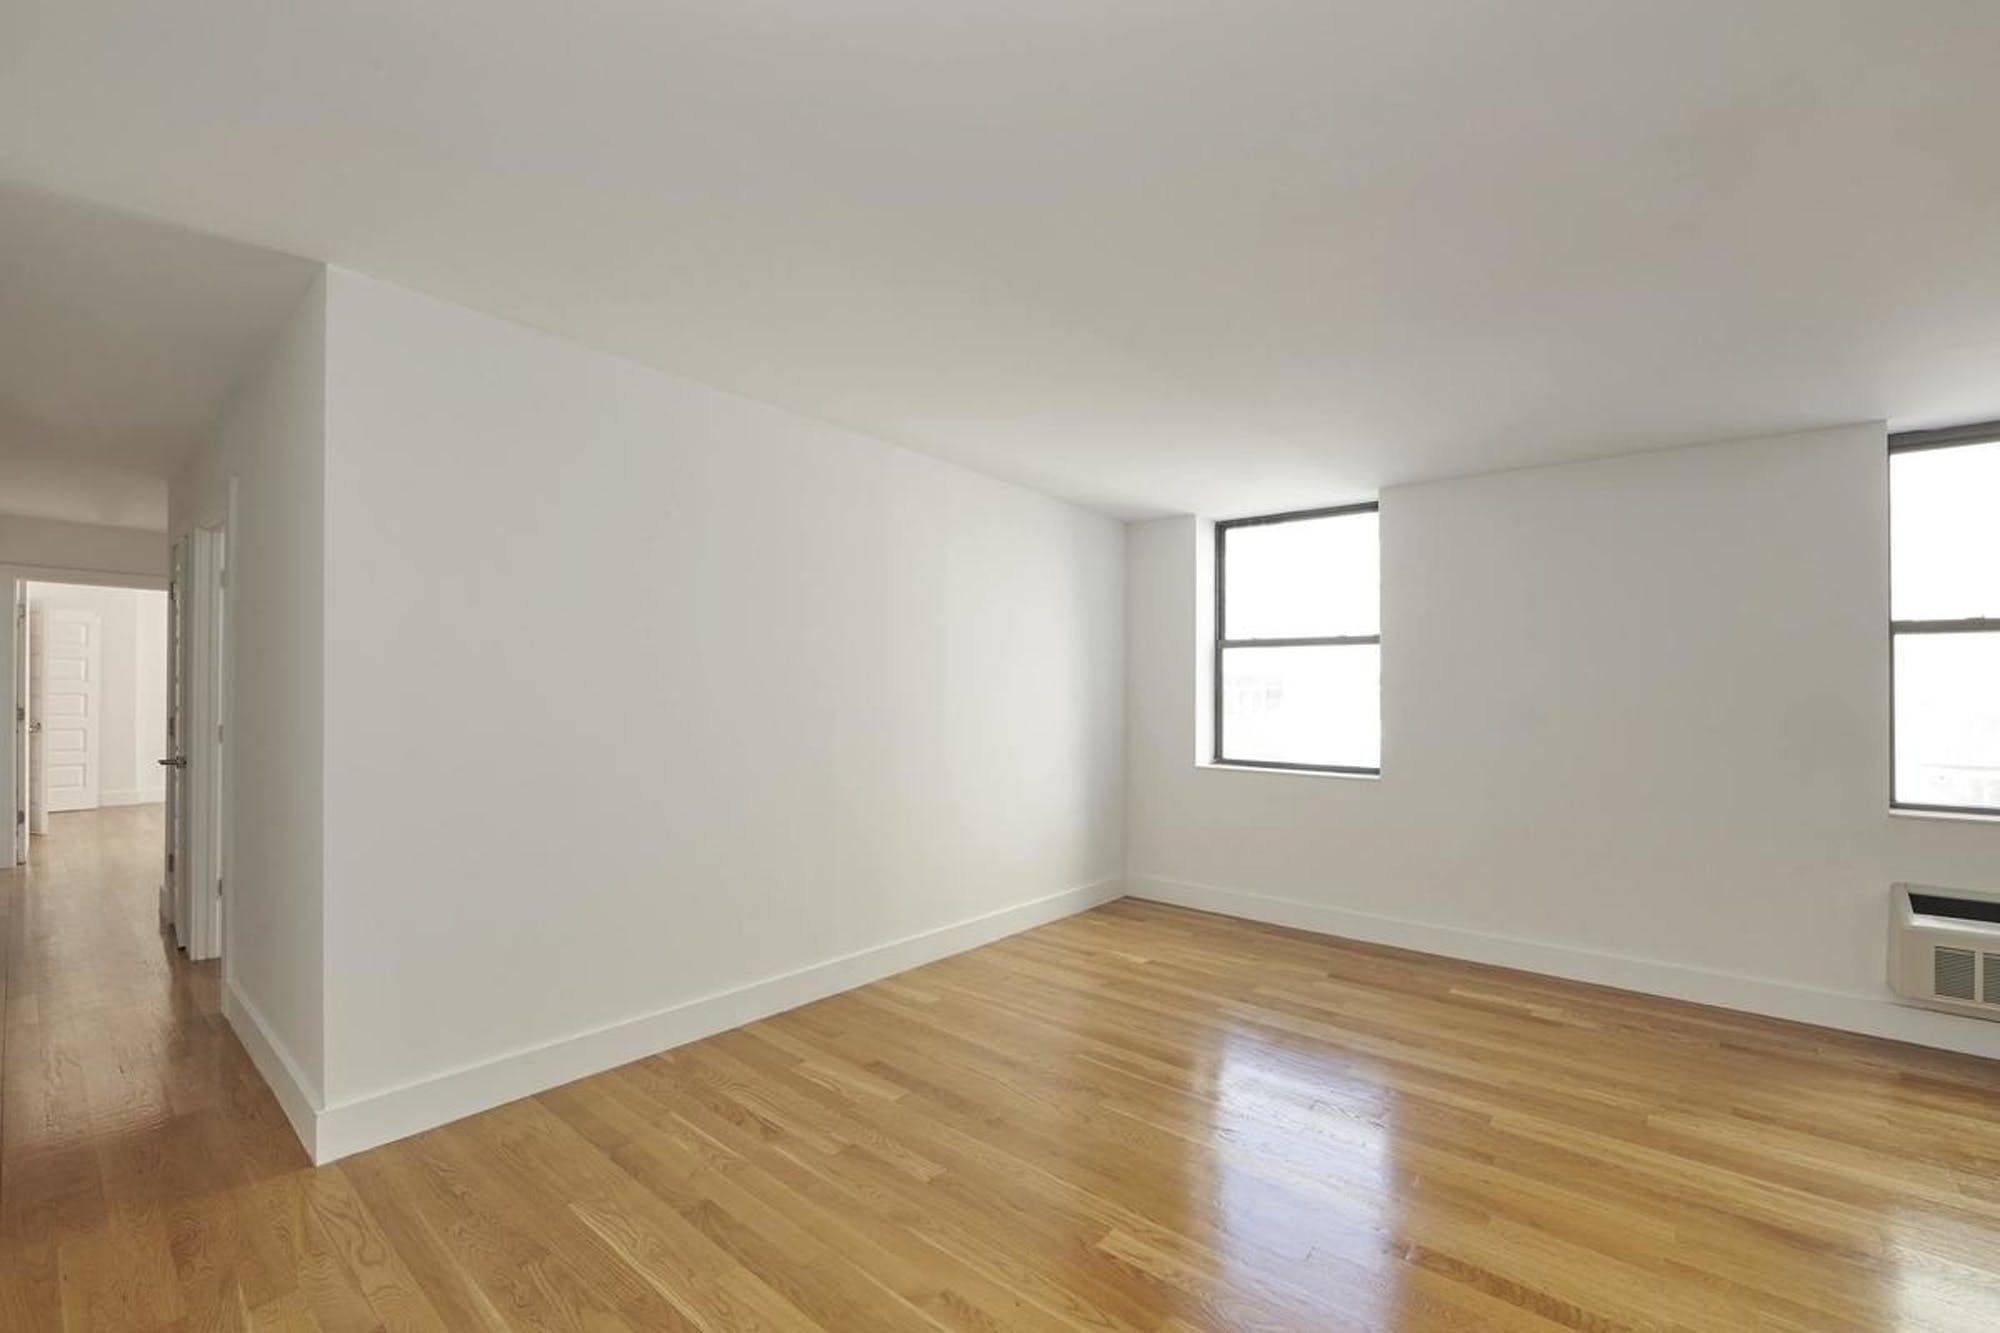 Welcome to Lofts QB ! Live in a spacious 3 bedroom apartment and in a building that has it all.